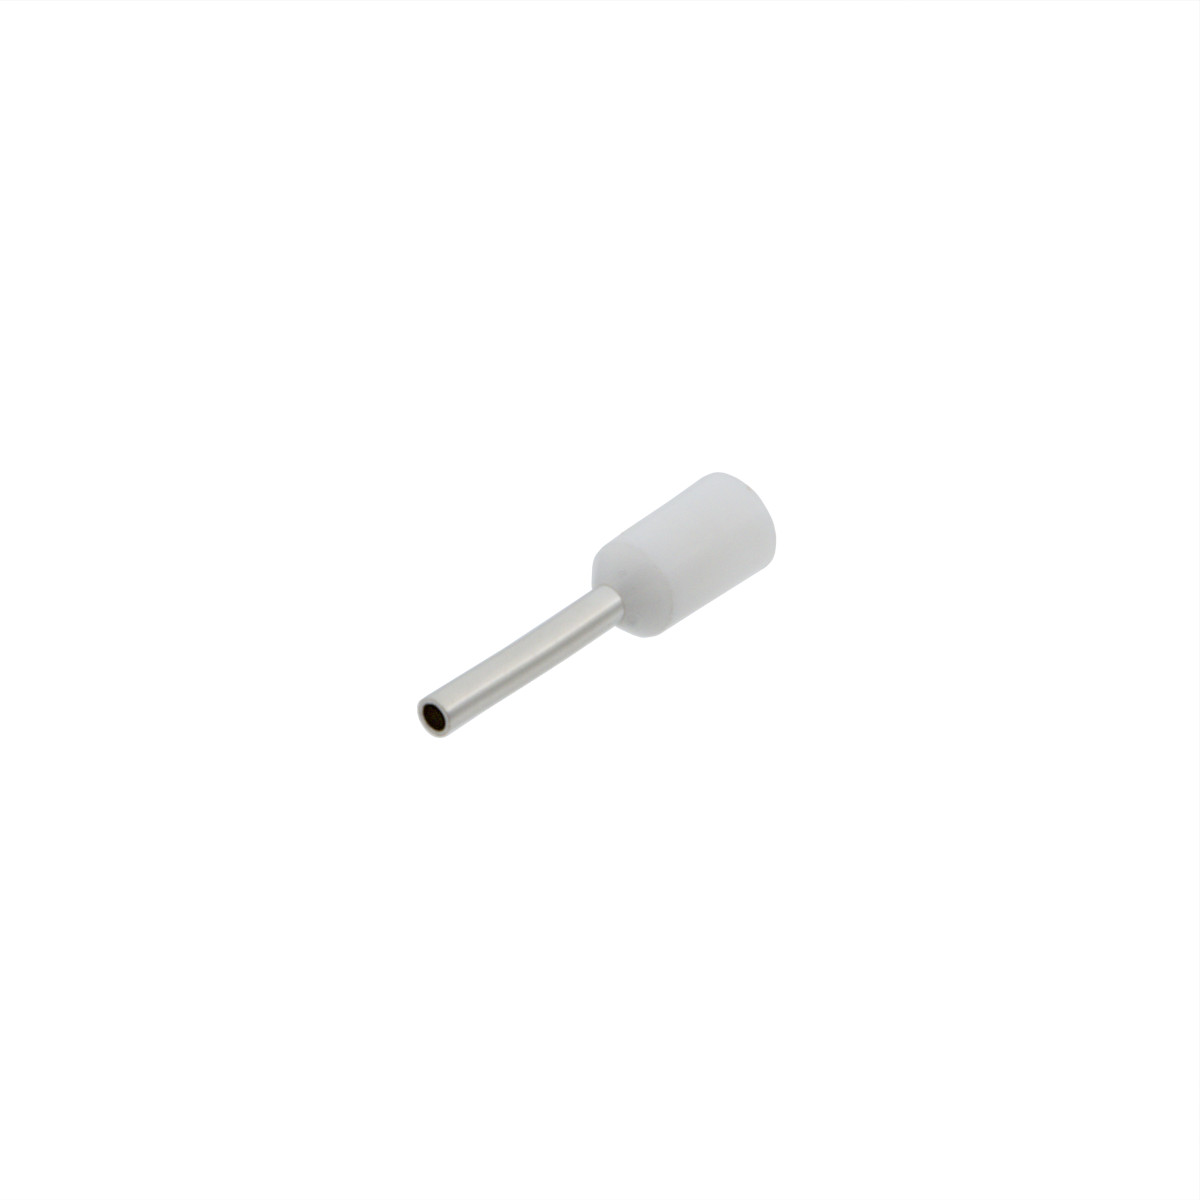 Insulated ferrule for 0.5mm² [AWG 22] cable